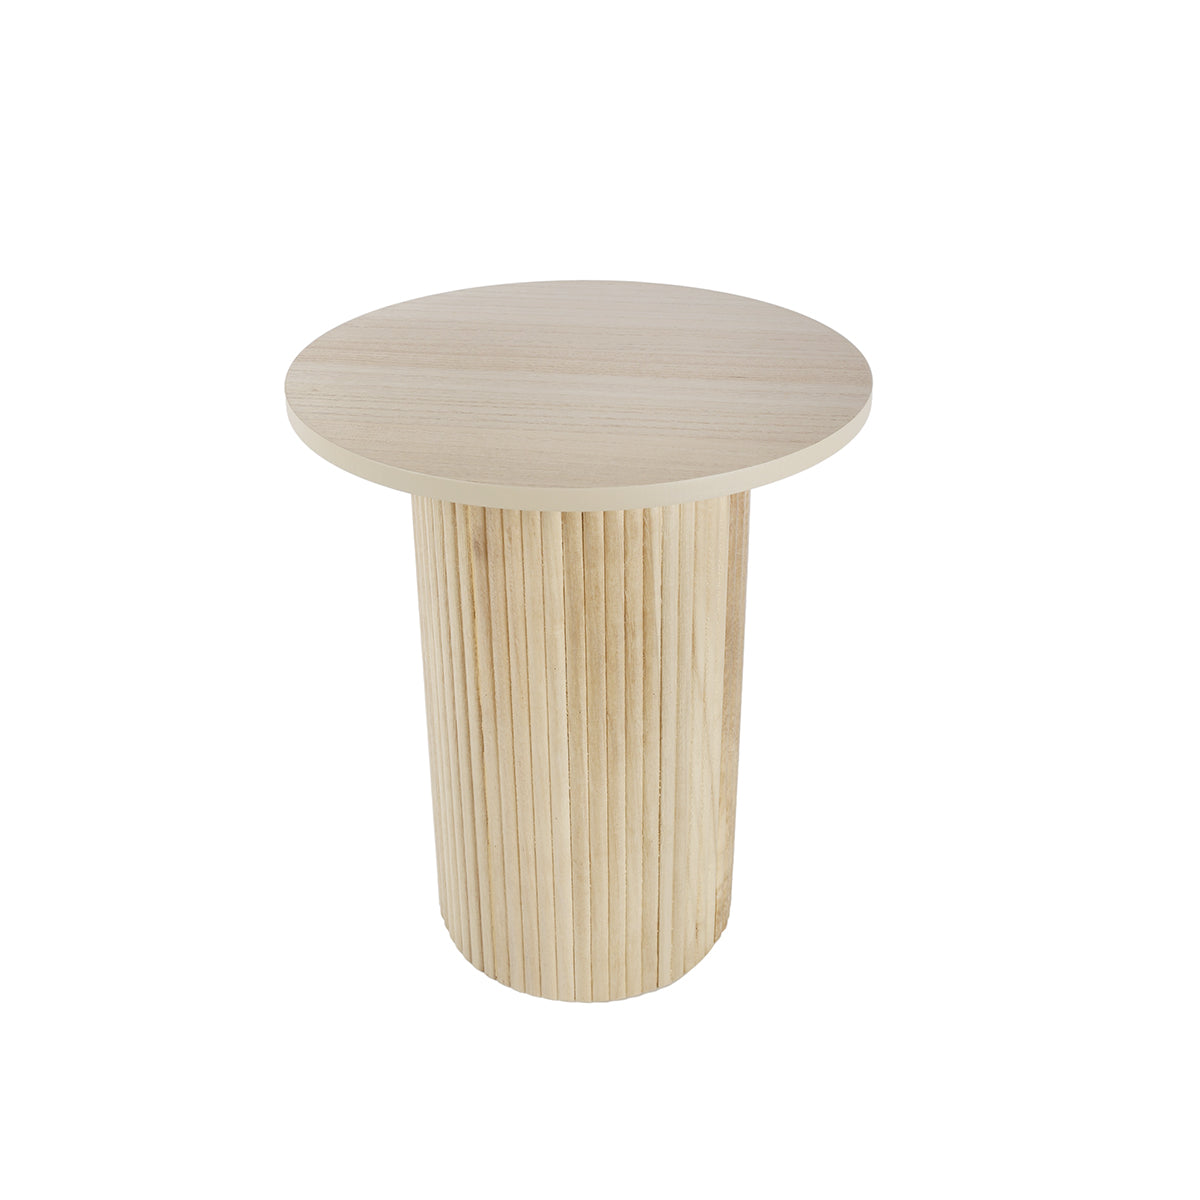 Aimee Fluted Side Table Natural
 50 x 40 x 40 cm